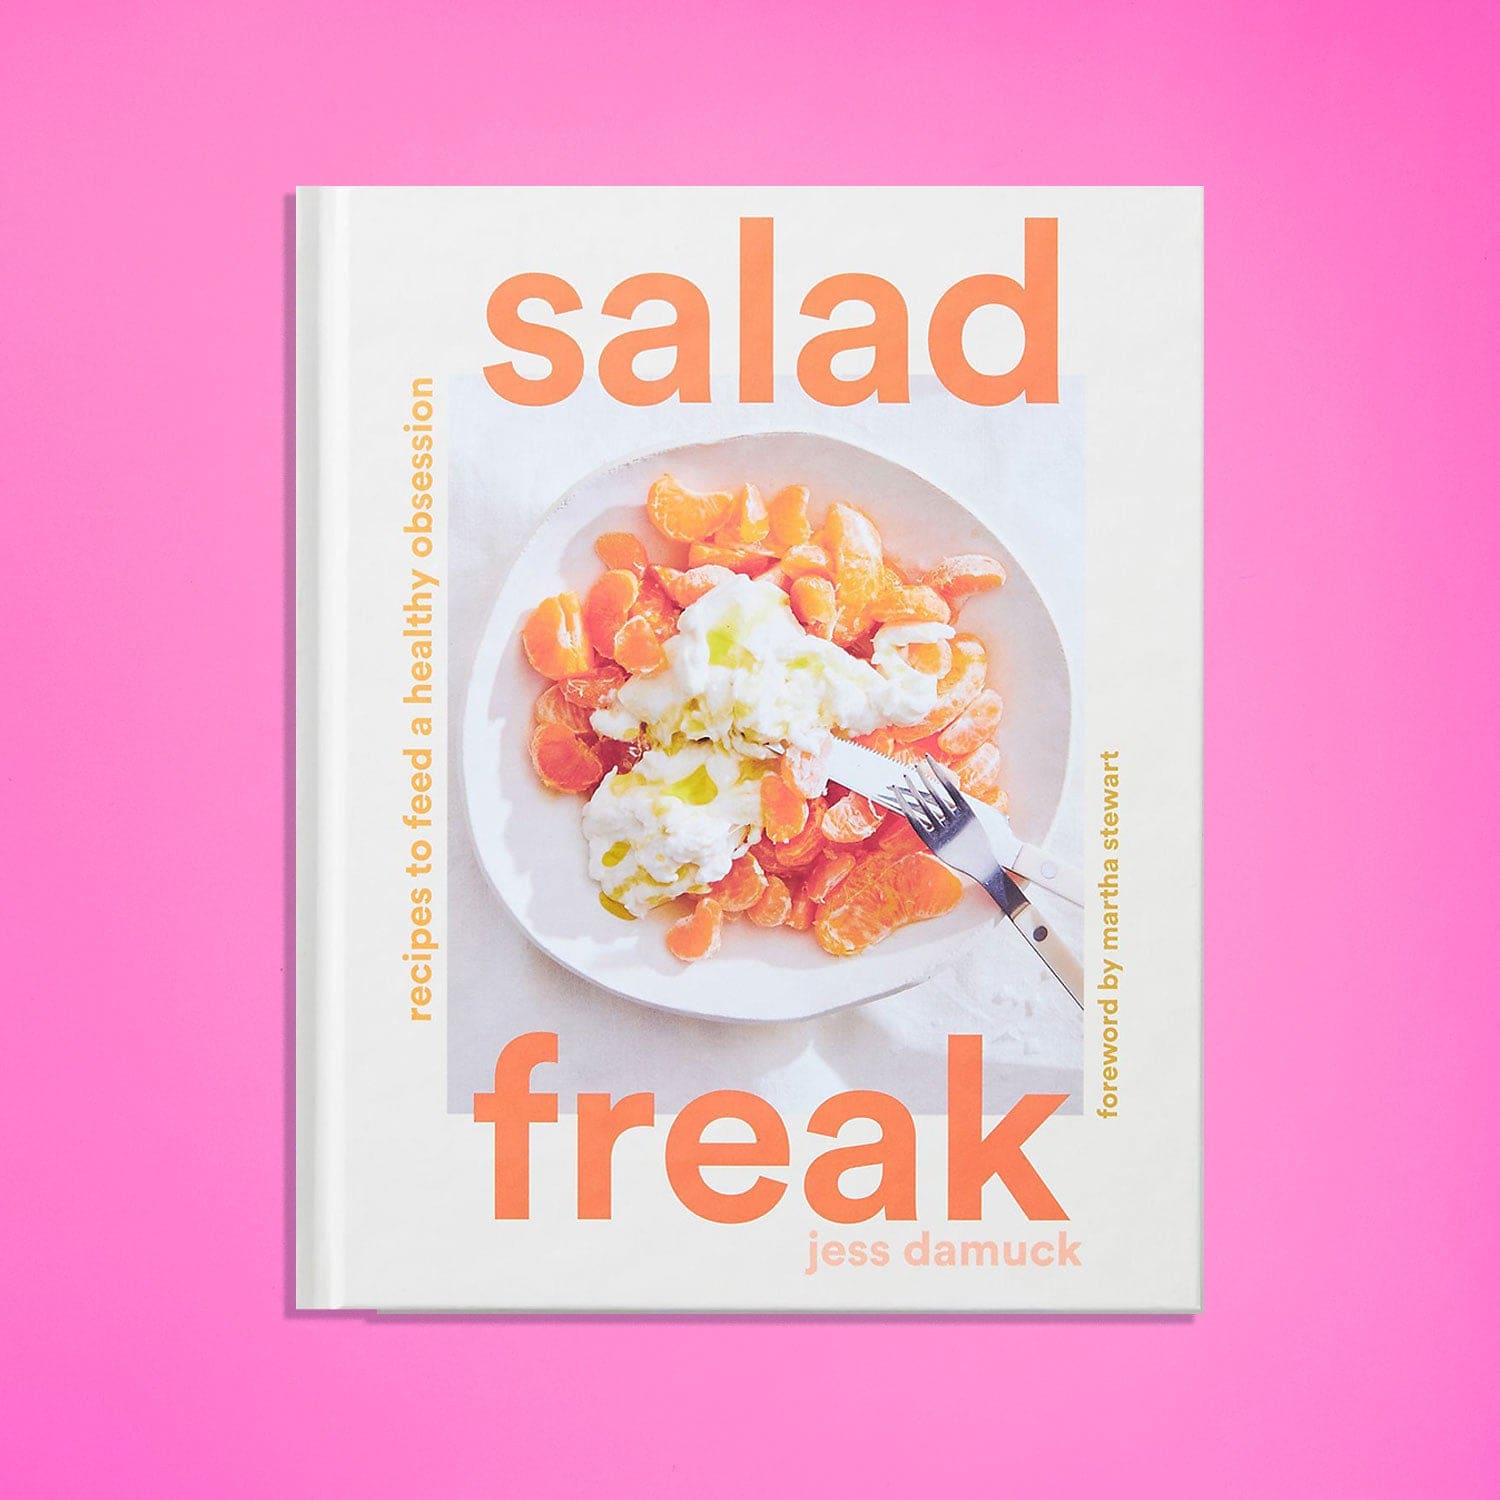 https://cdn.shopify.com/s/files/1/2636/1058/files/salad-freak-recipes-feed-healthy-obsession-best-seller-birthday-gifts-book-cook-cookbook-519.jpg